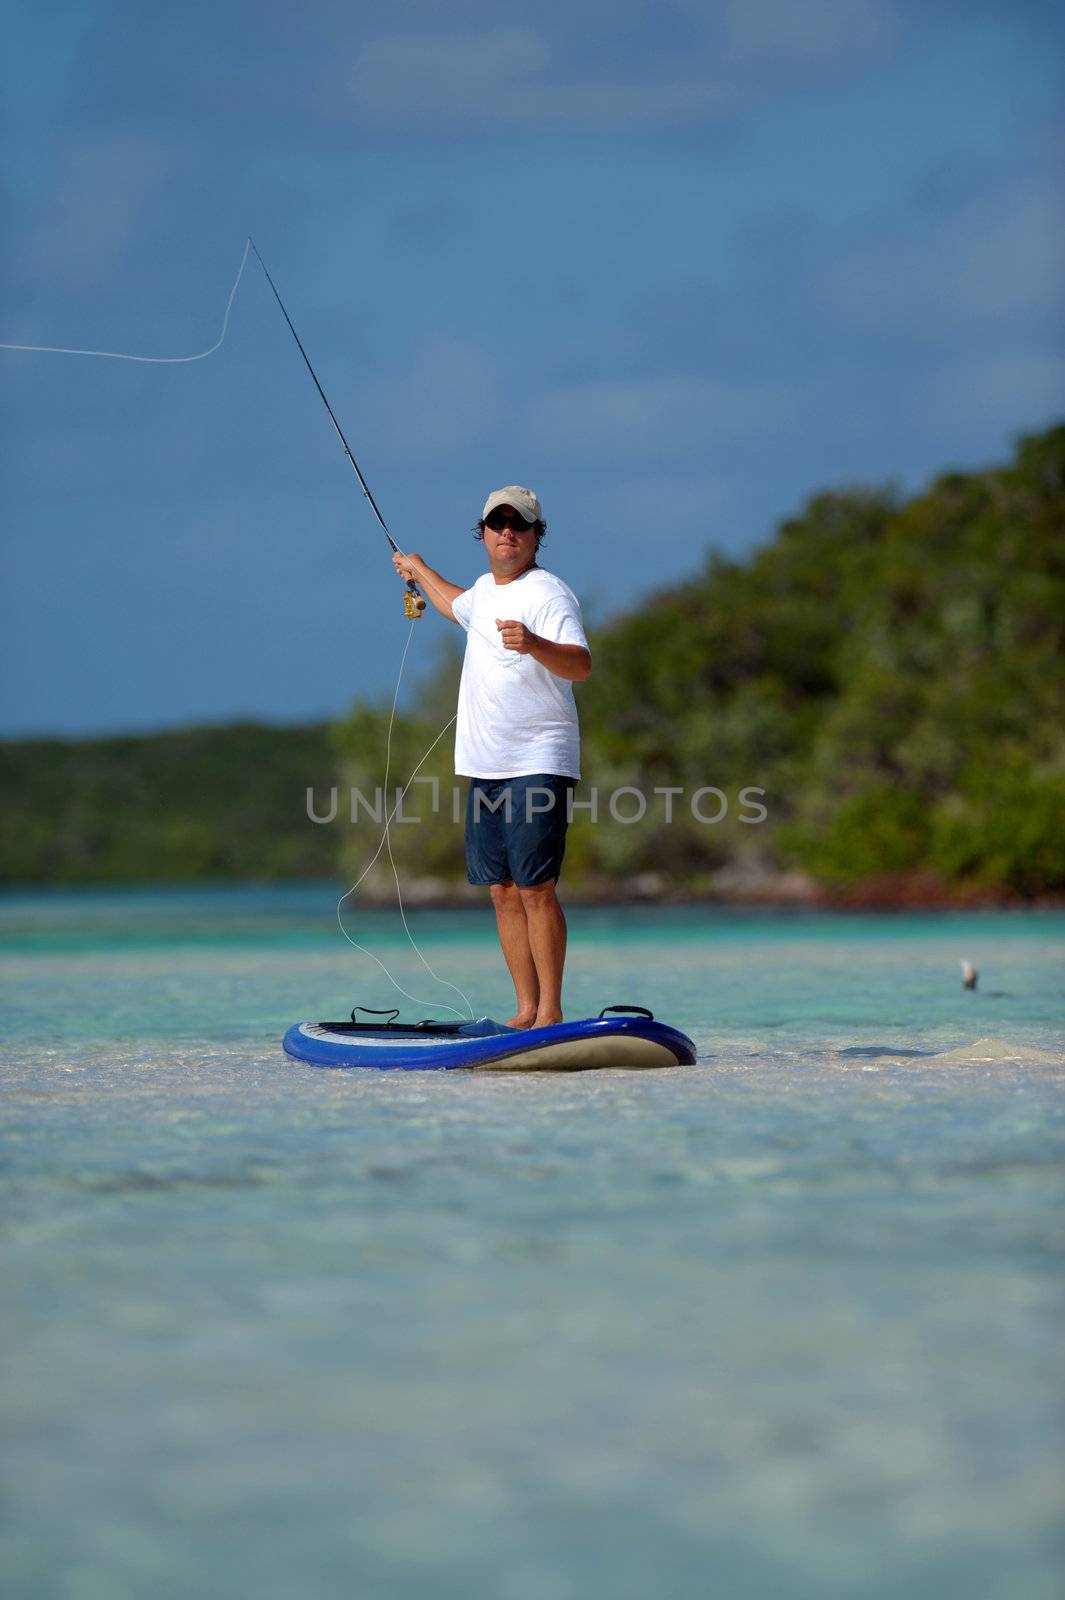 Man fly fishing on a paddle board by ftlaudgirl